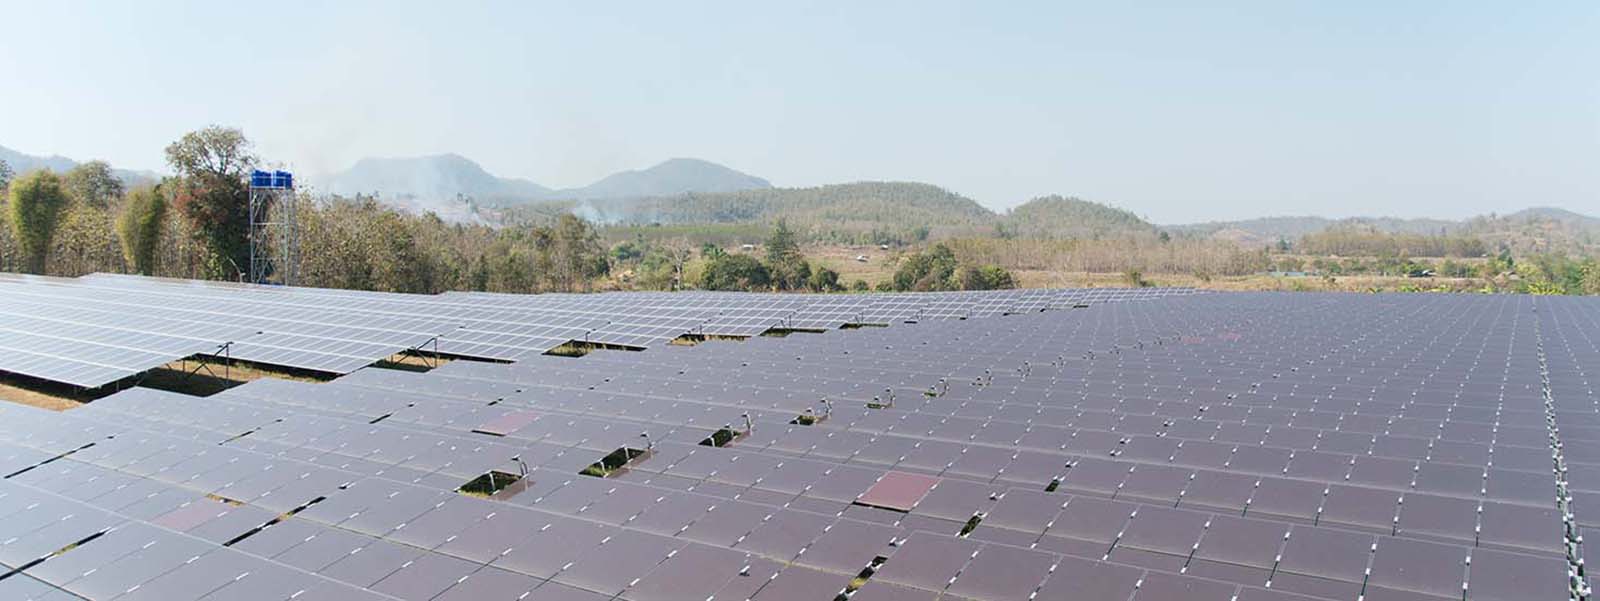 Field of solar microgrids